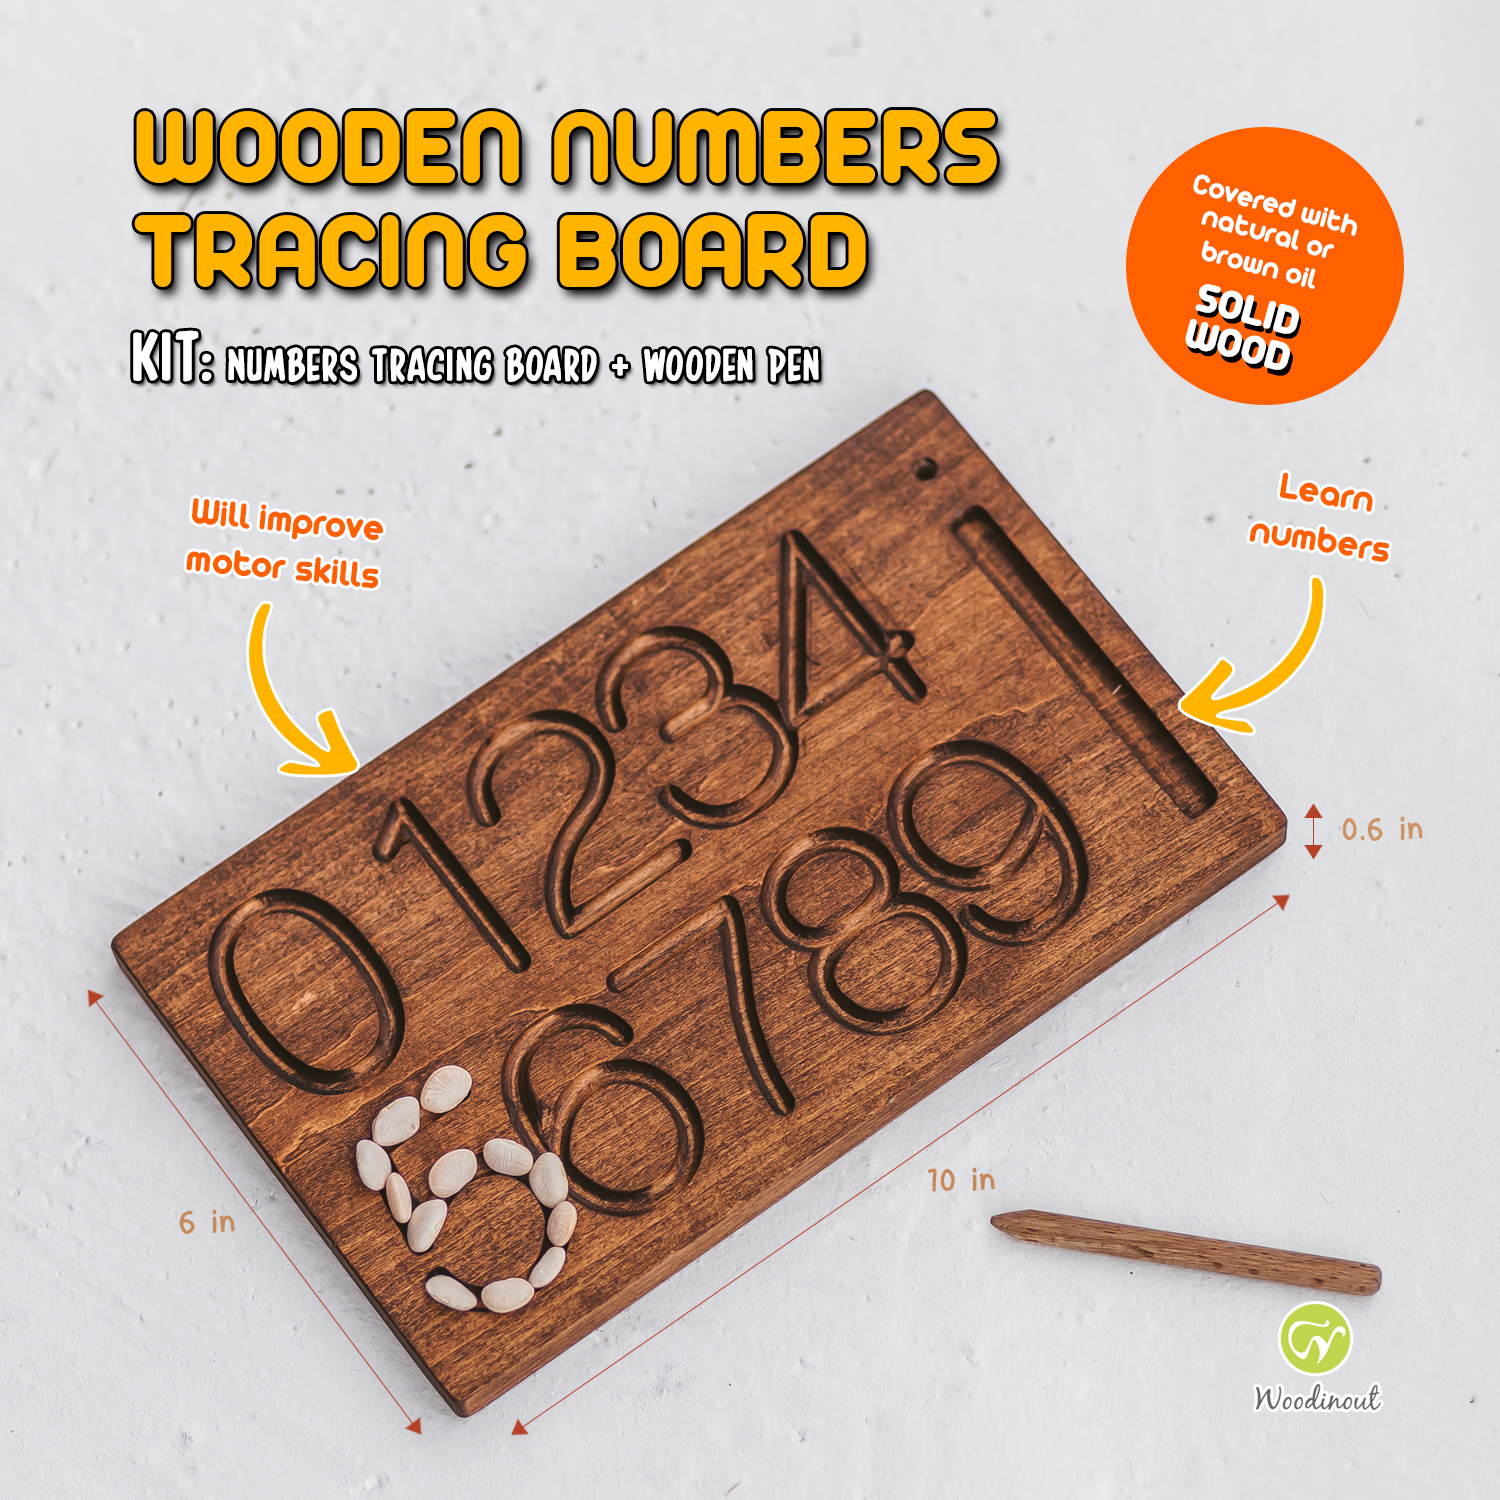 Wooden Tracing numbers 1 to 10 board - Woodinout ©